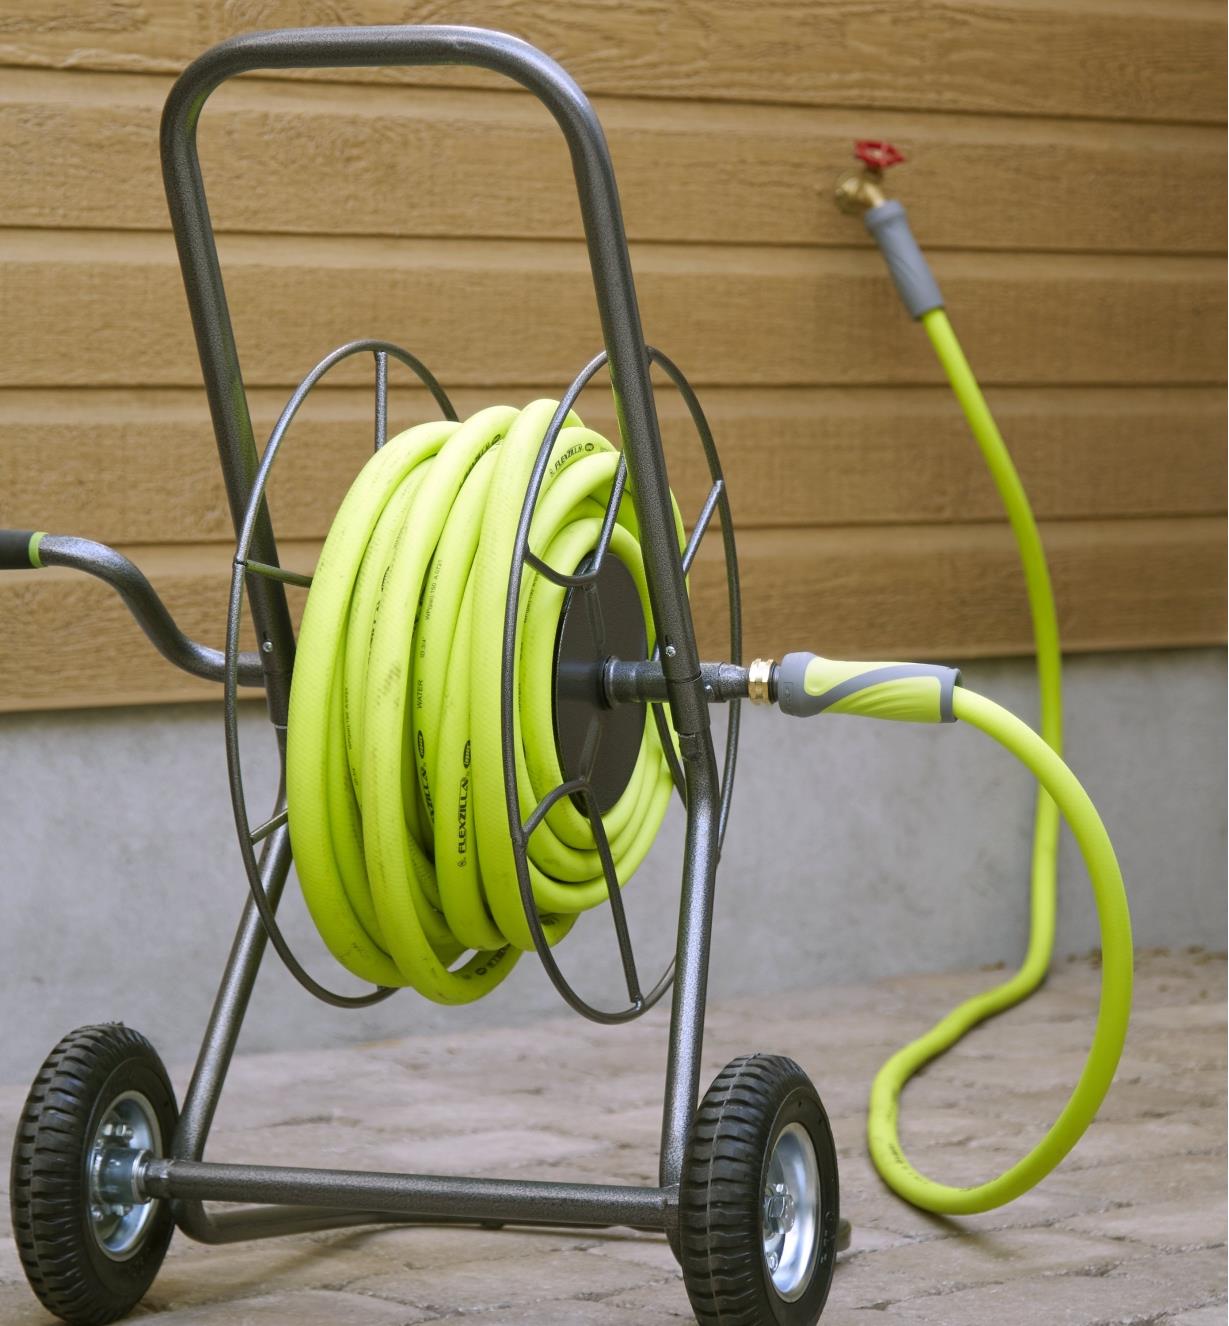 A shorter, bright green leader hose connects to a coiled, longer,  bright green hose